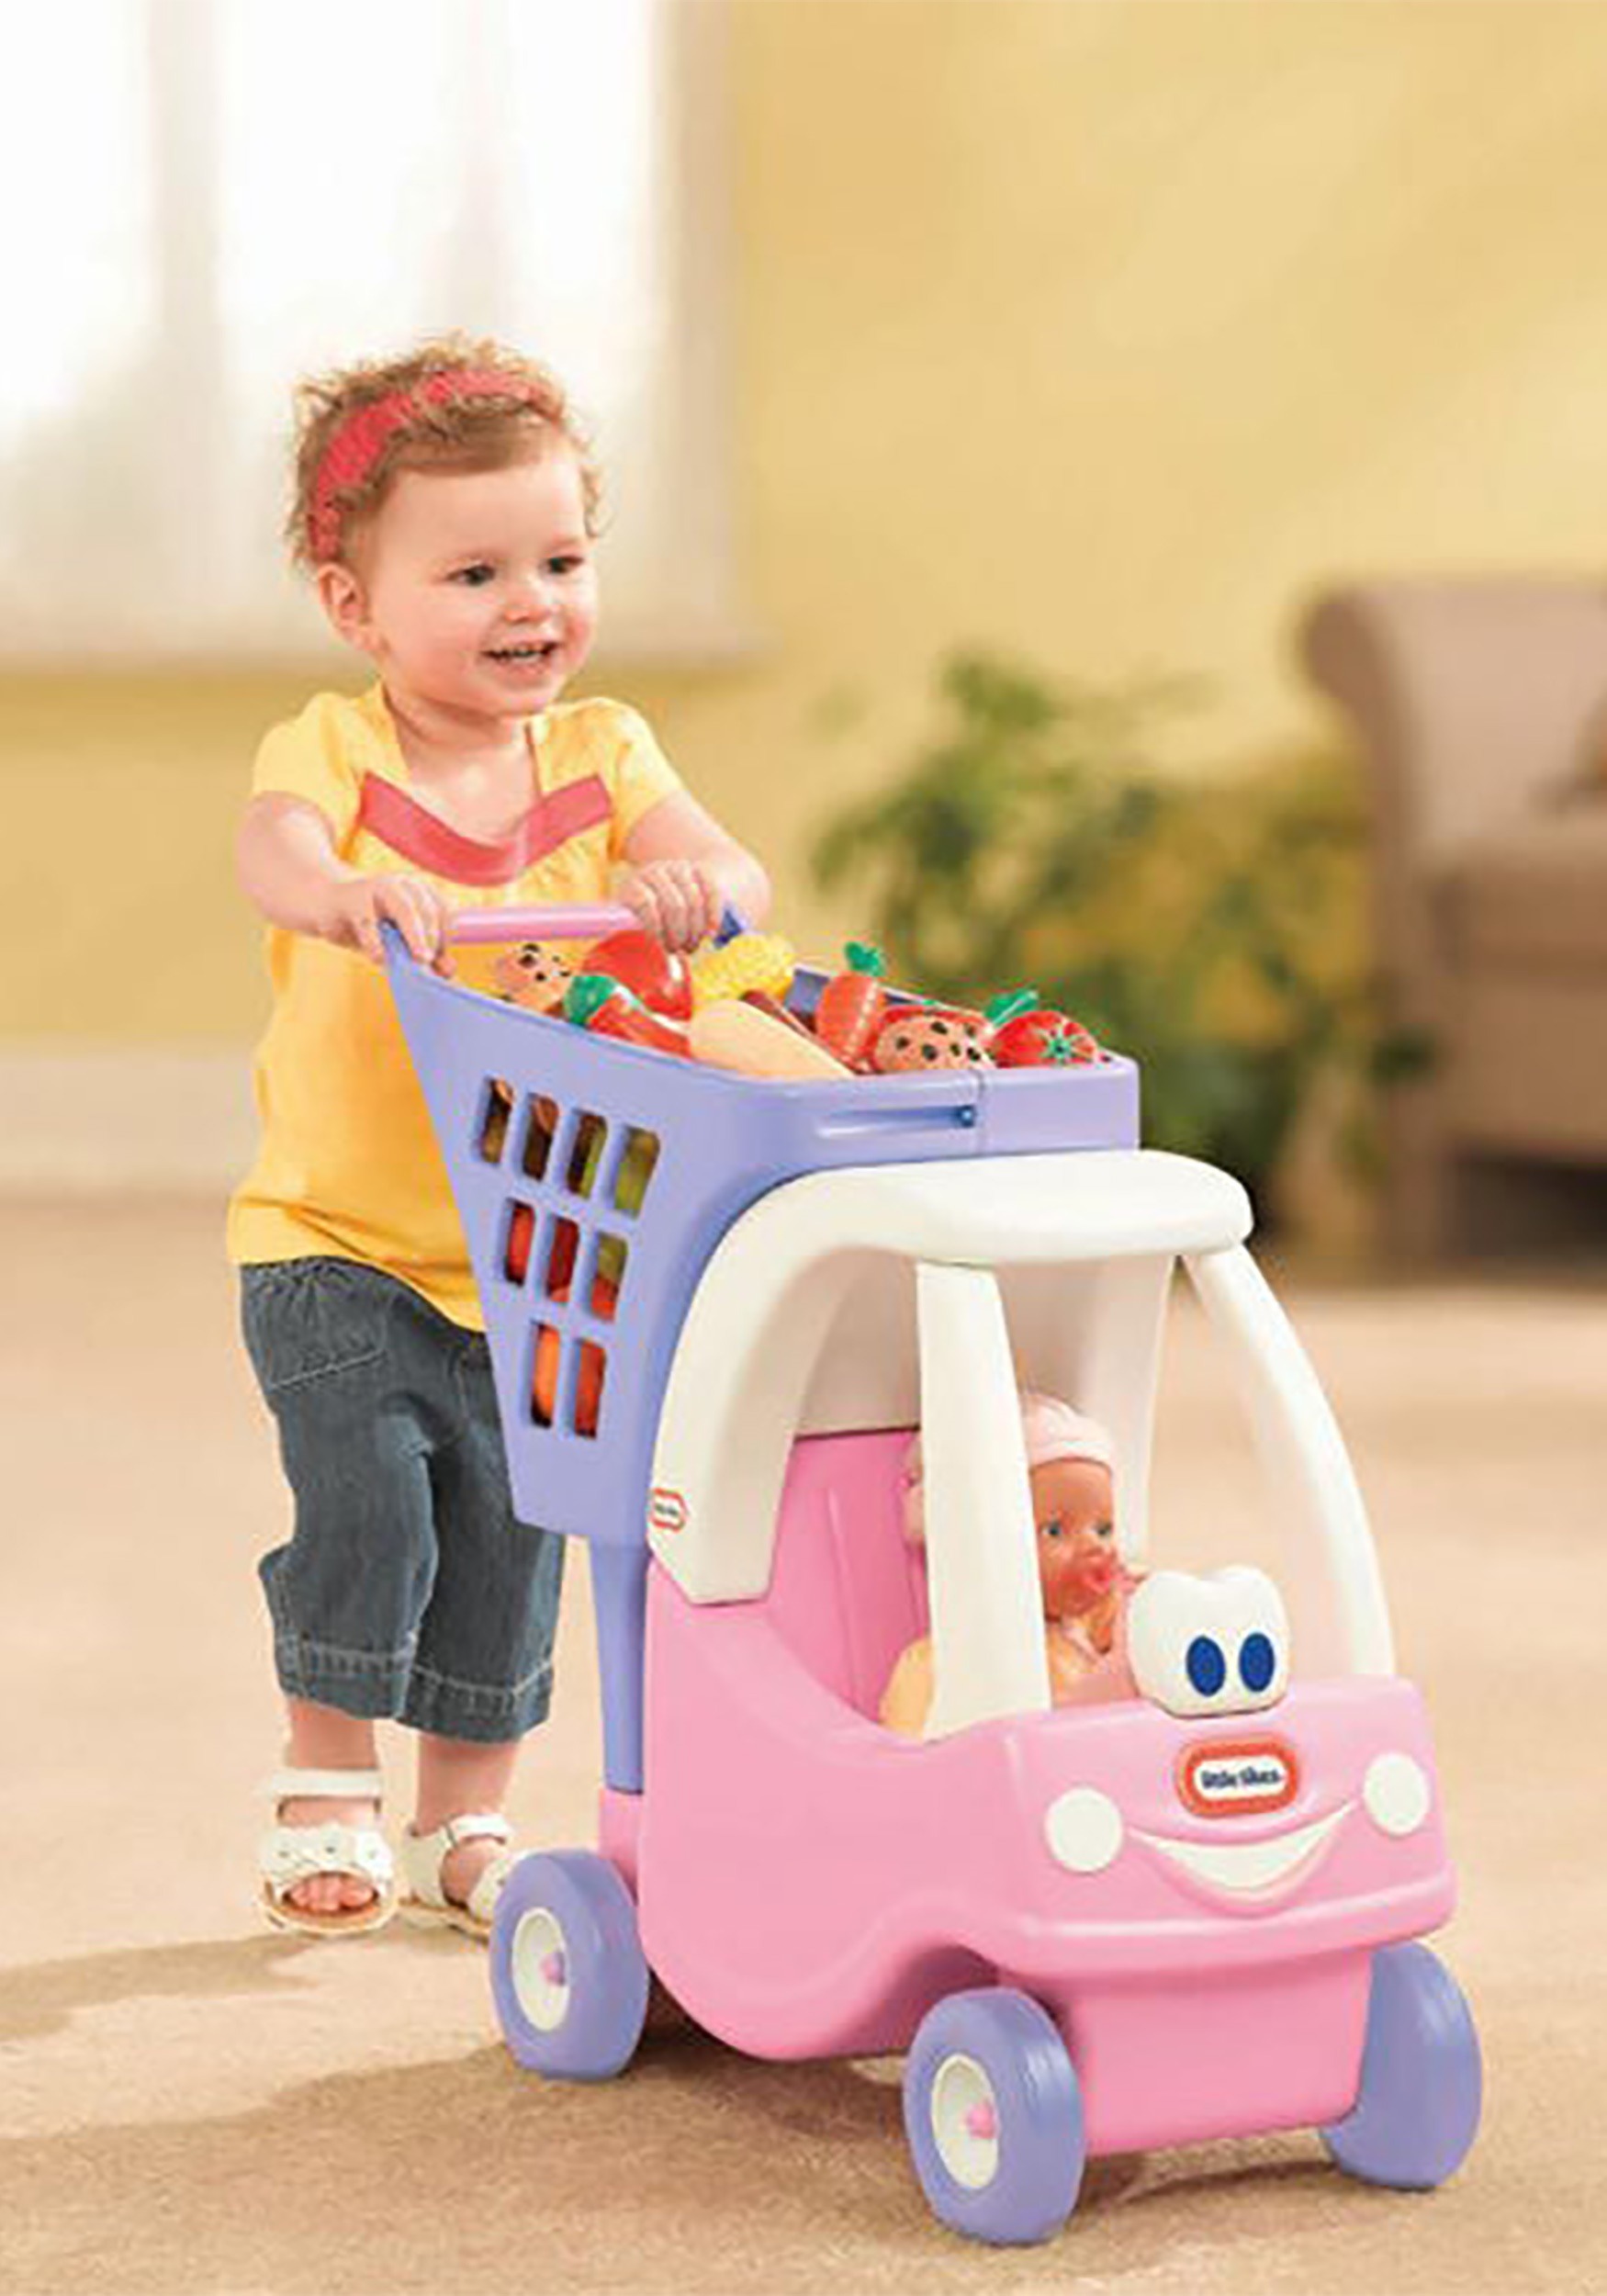 little tikes cozy coupe shopping trolley